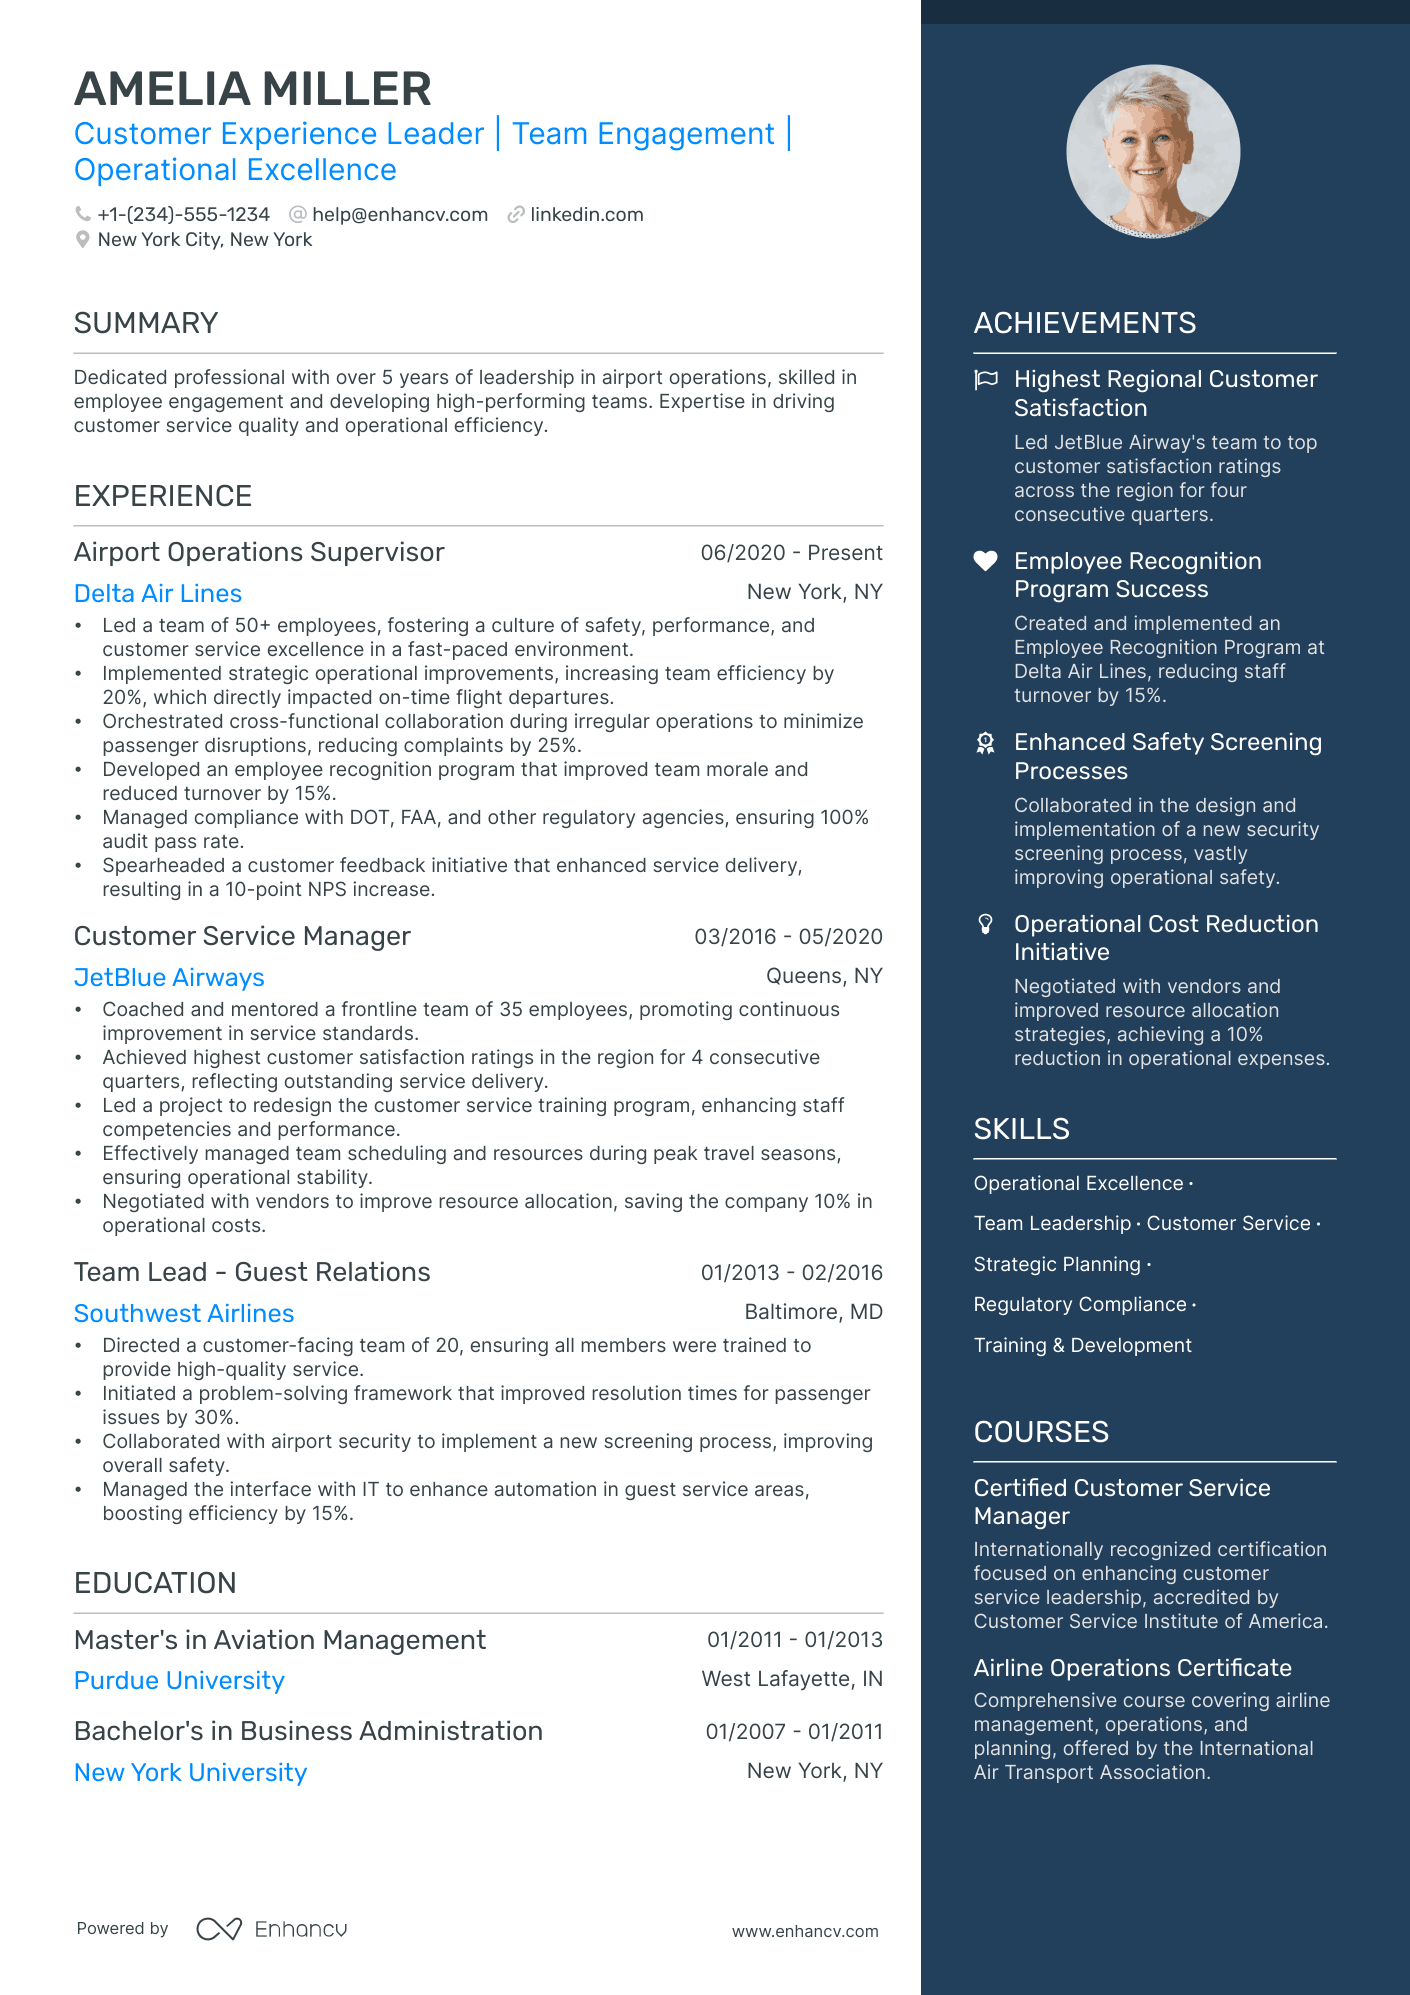 resume template customer service manager